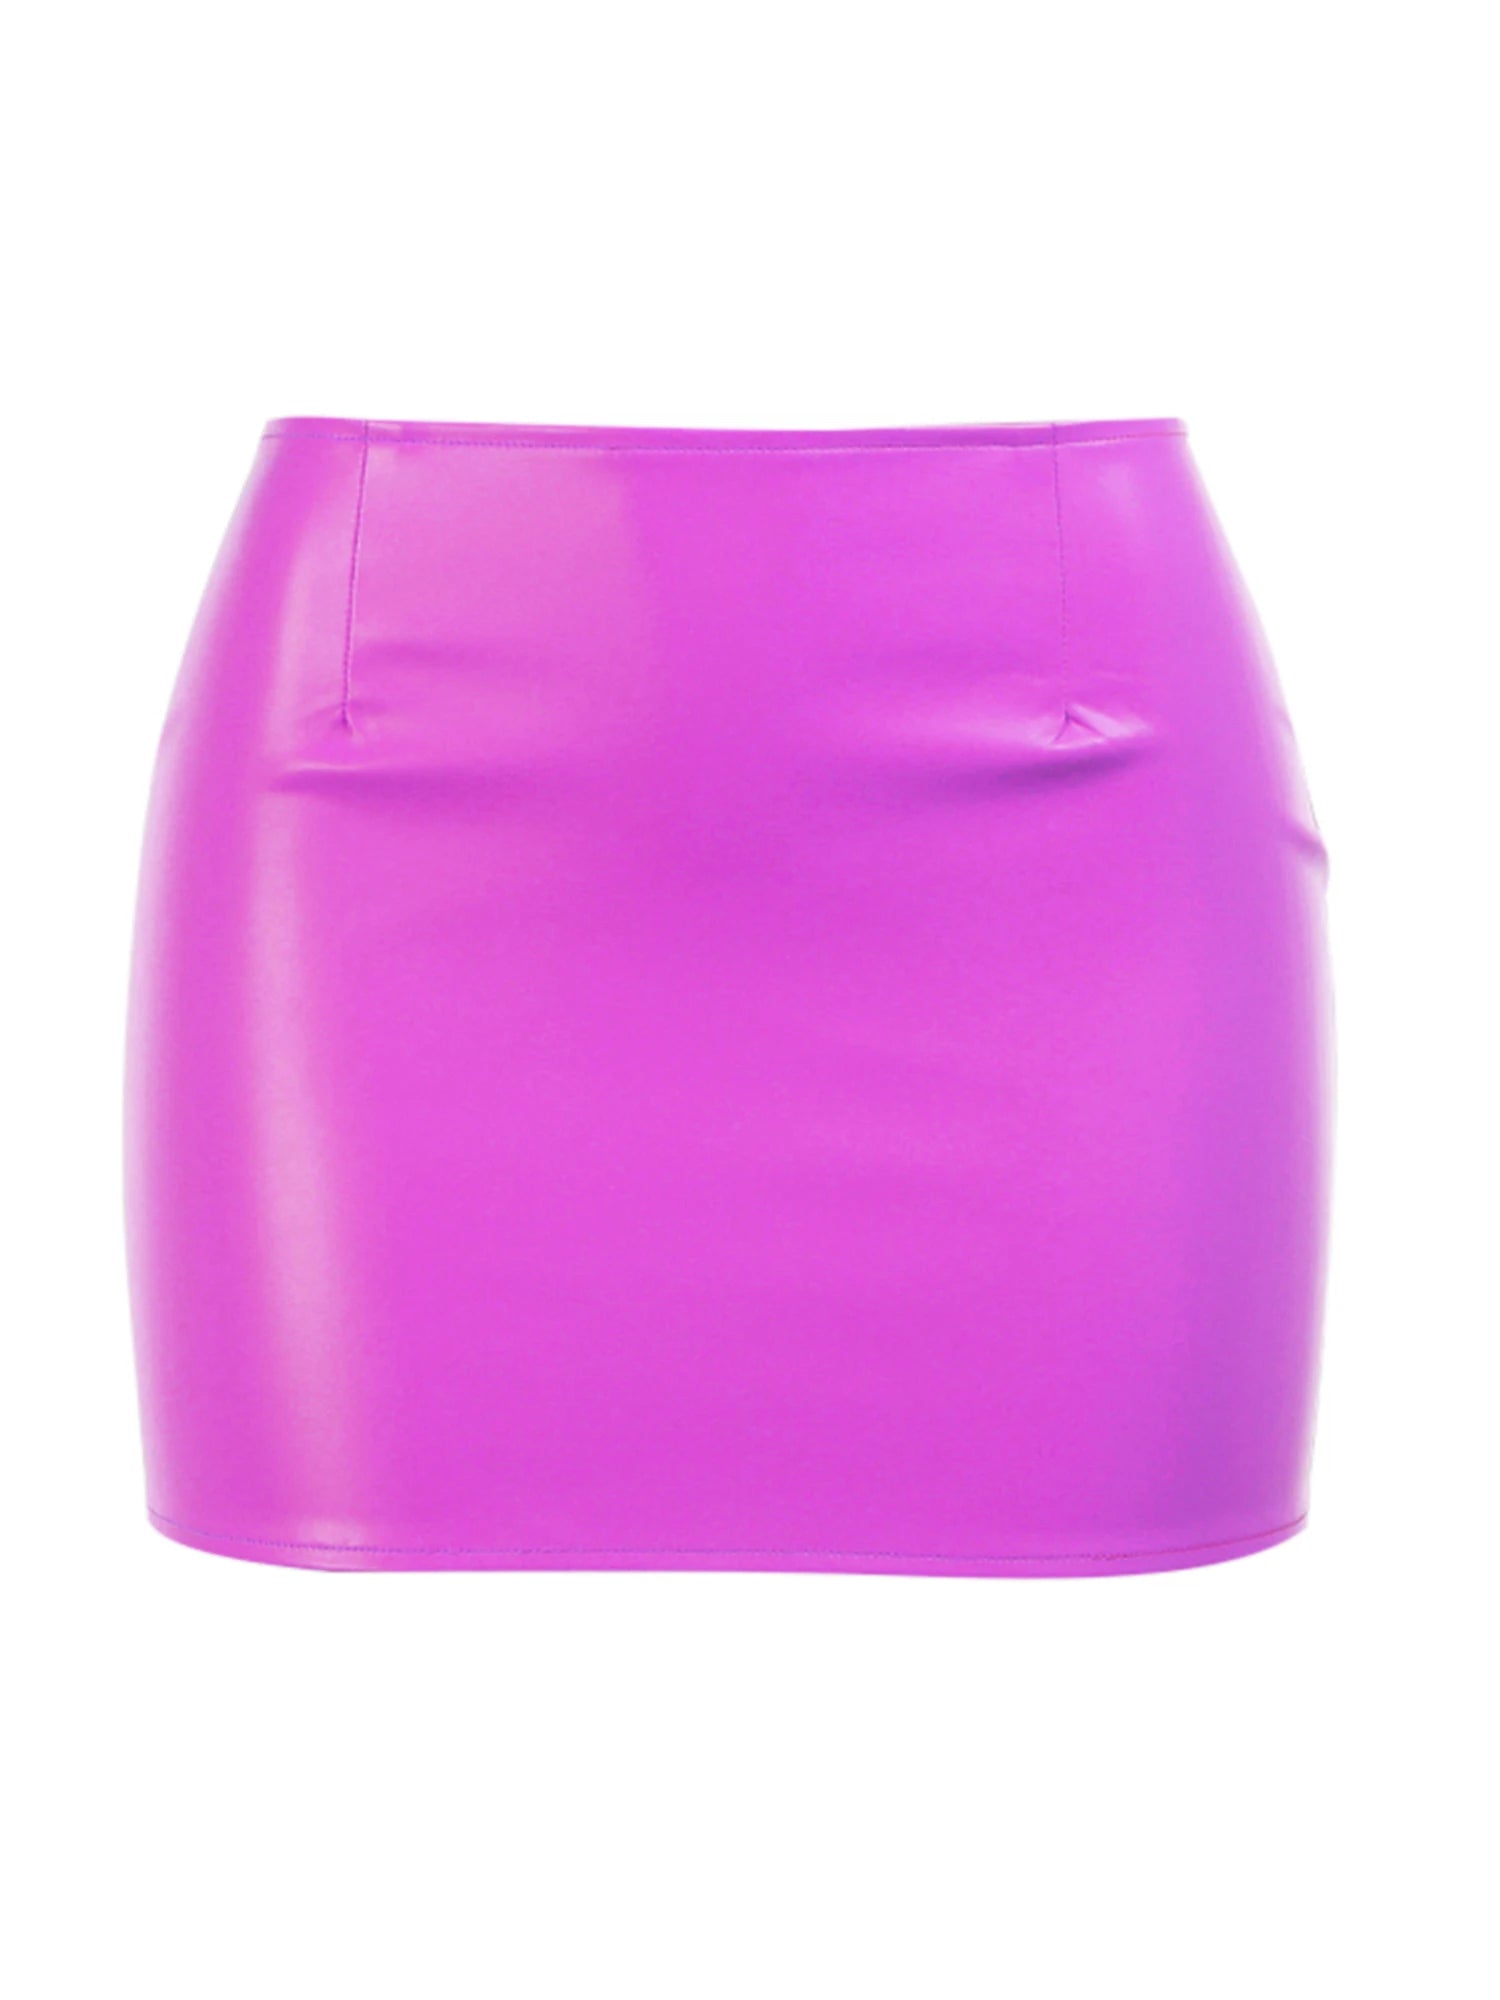 Women Leather Mini Skirt. Solid Color Low-Waist Pencil Miniskirt with Large Zipper for Girls. Green/Yellow/Rose Red